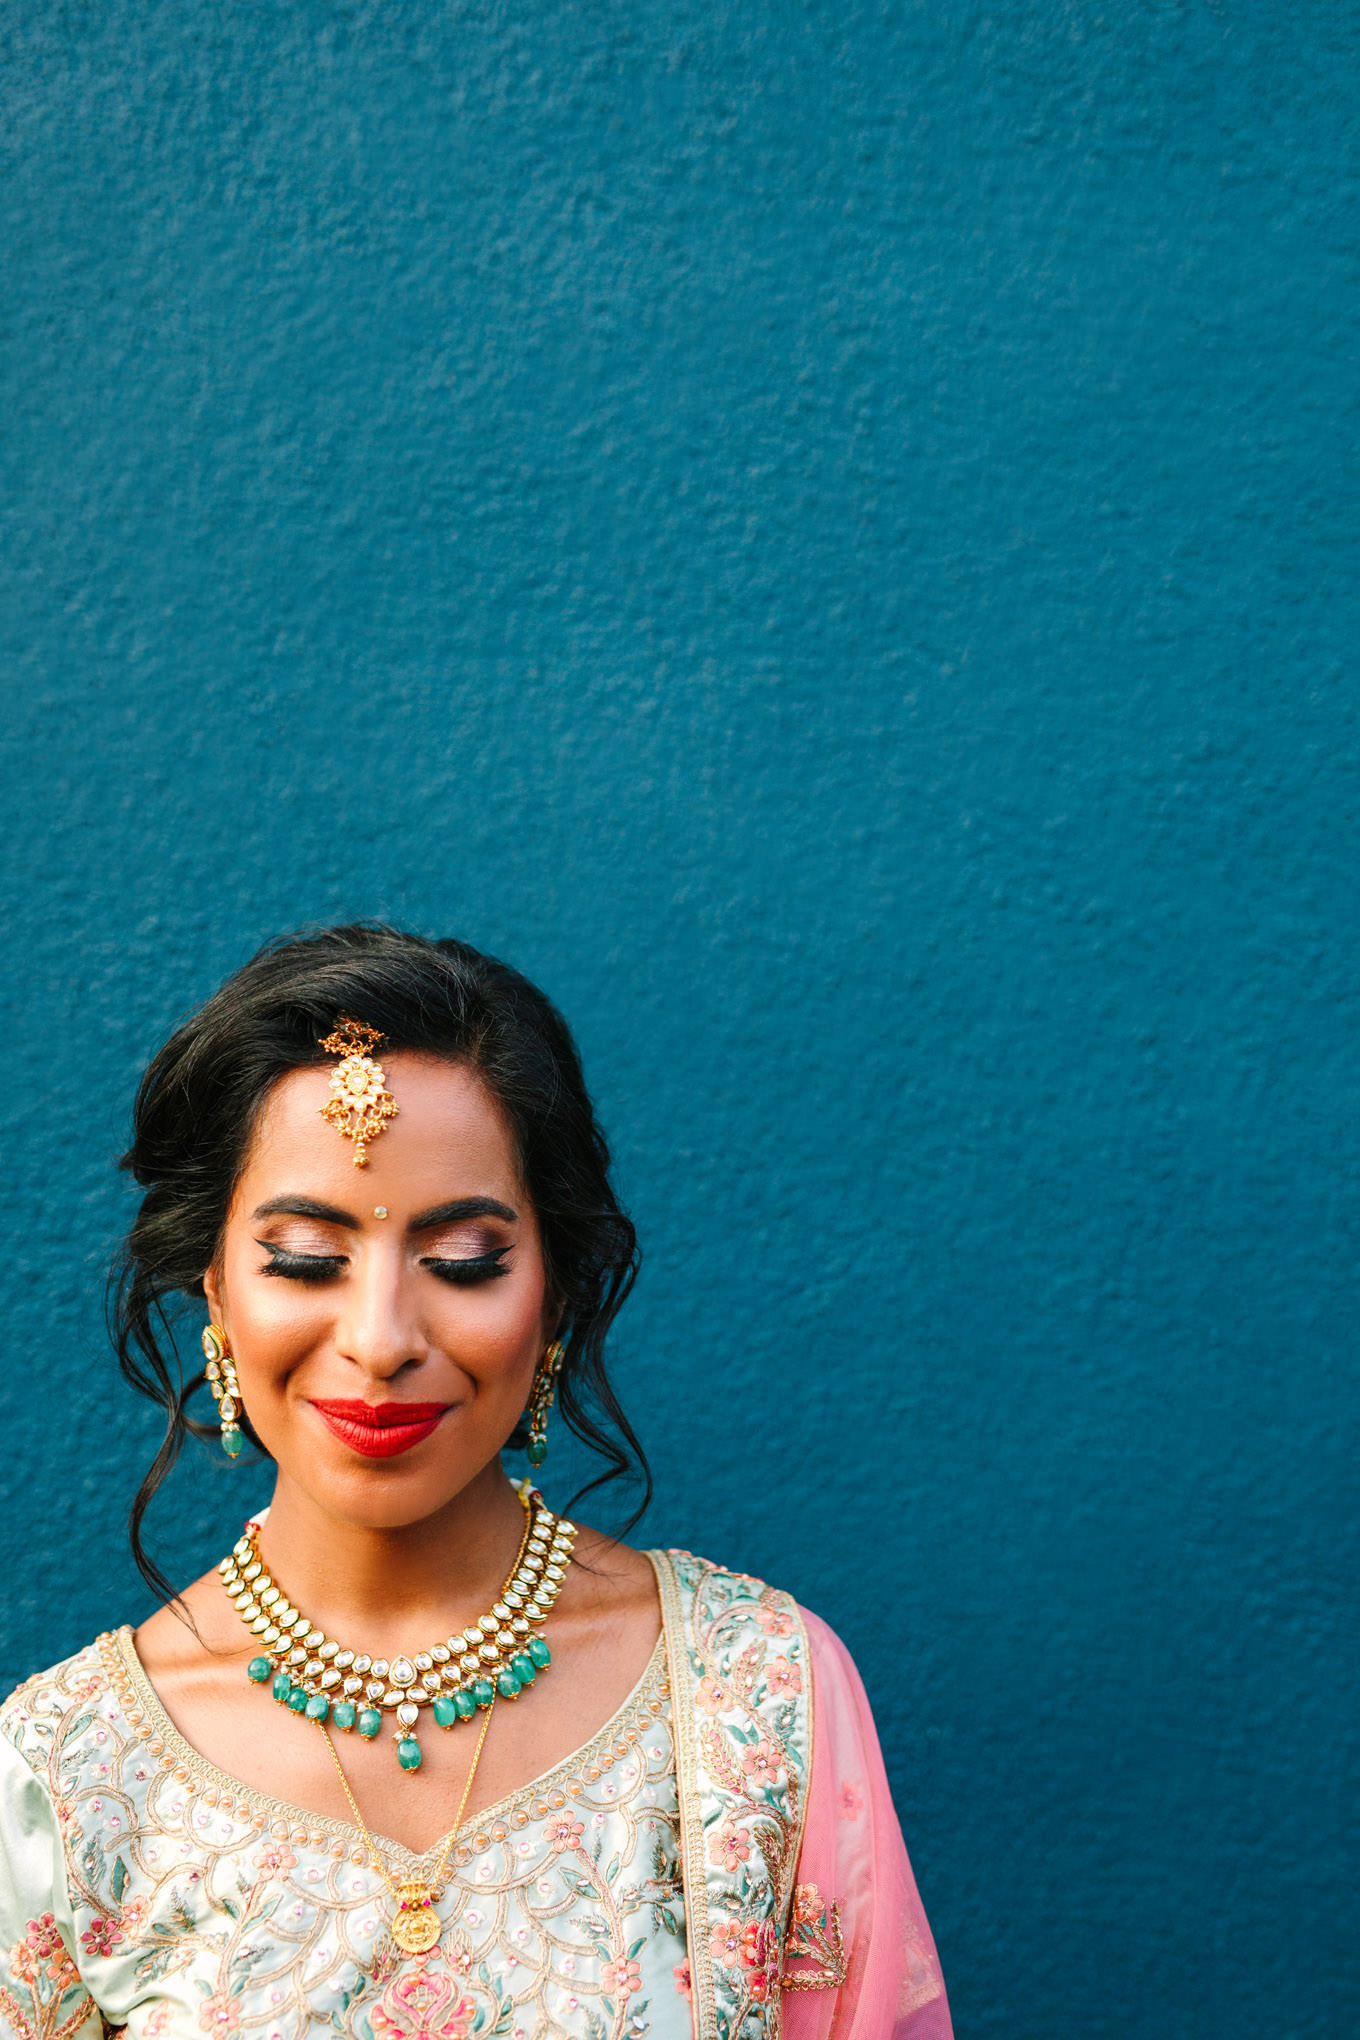 Bride in pink, cream, and emerald embroidered gown. Bride in saree with cocktail in front of teal wall. Two Disney artists create a unique and colorful Indian Fusion wedding at The Fig House Los Angeles, featured on Green Wedding Shoes. | Colorful and elevated wedding inspiration for fun-loving couples in Southern California | #indianwedding #indianfusionwedding #thefighouse #losangeleswedding   Source: Mary Costa Photography | Los Angeles